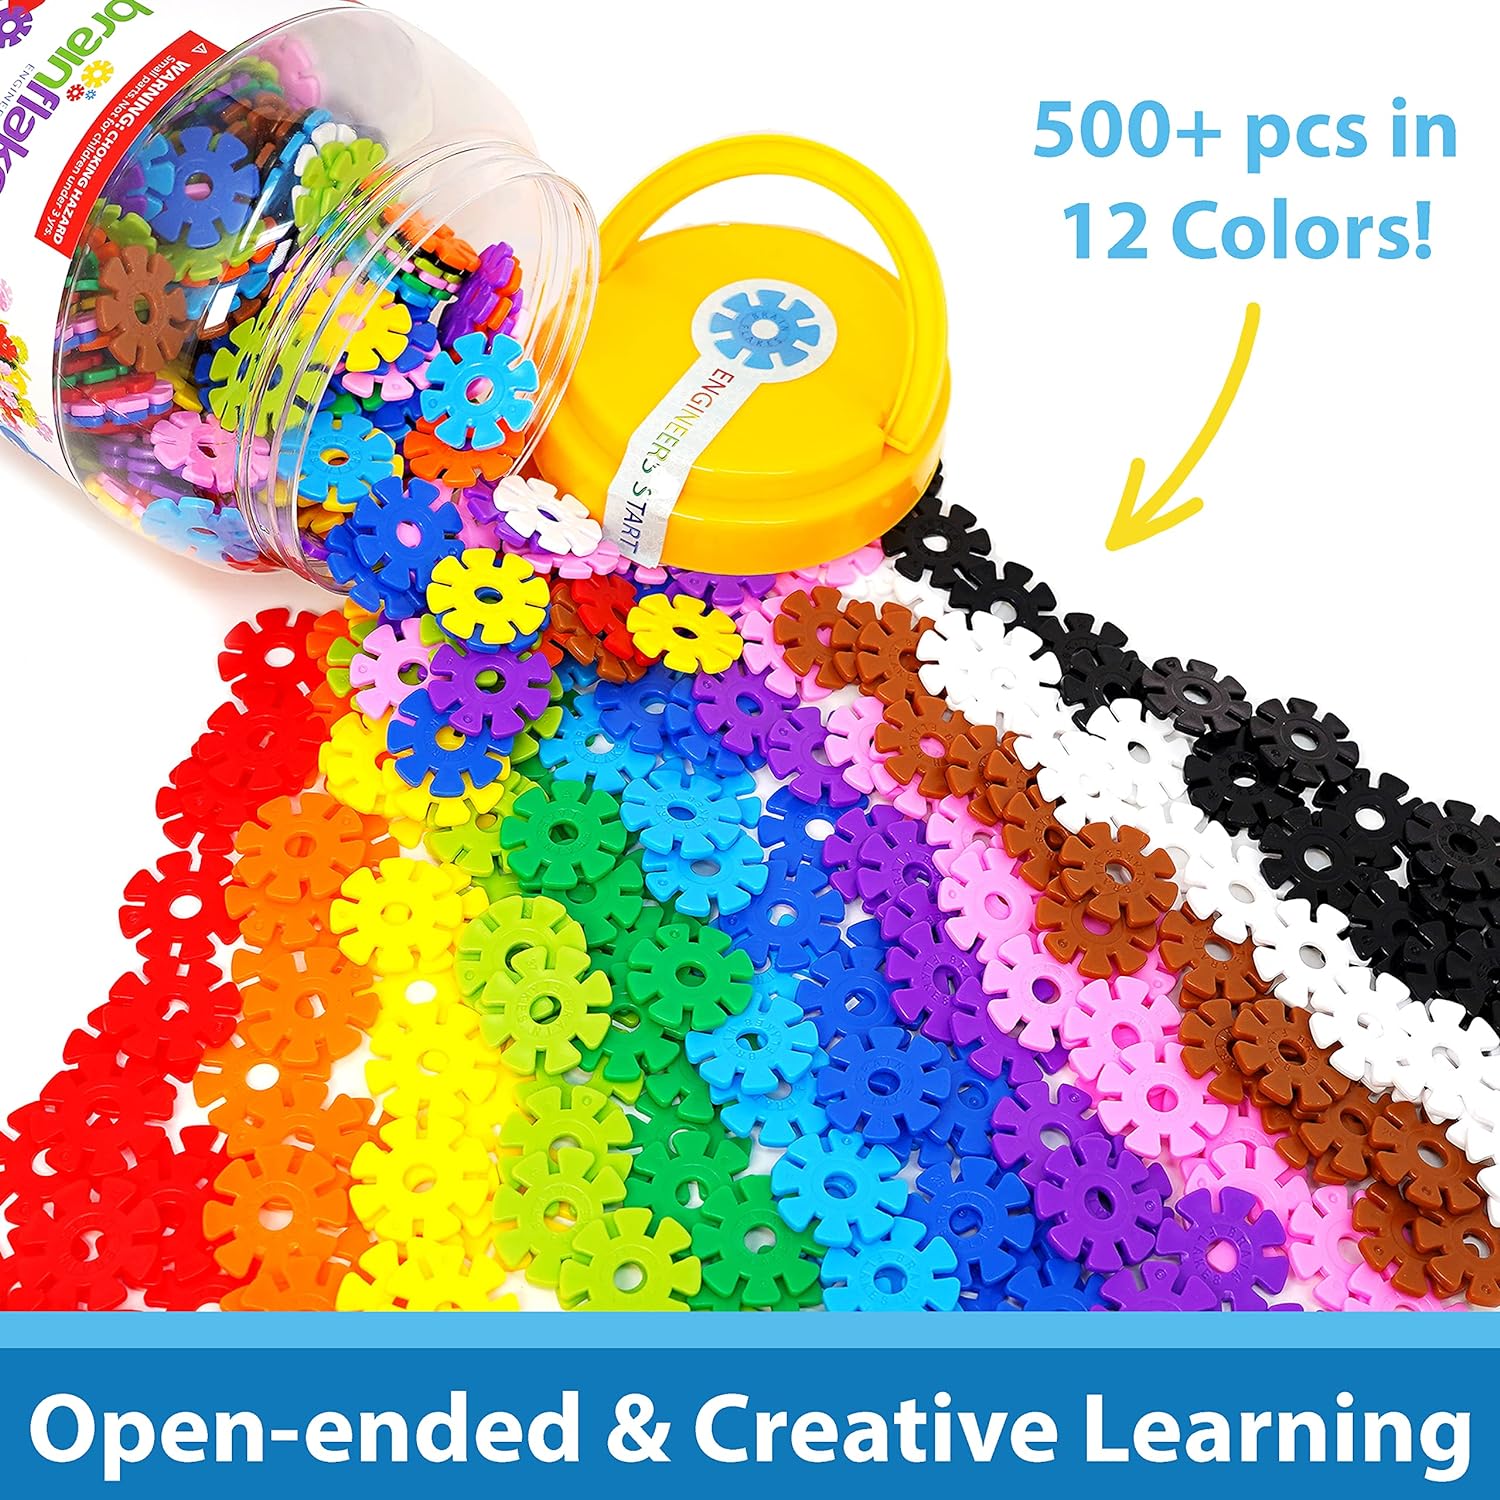 VIAHART Brain Flakes 500 Piece Interlocking Plastic Disc Set - A Creative and Educational Alternative to Building Blocks - Tested for Childrens Safety - A Great Stem Toy for Both Boys and Girls : Toys Games